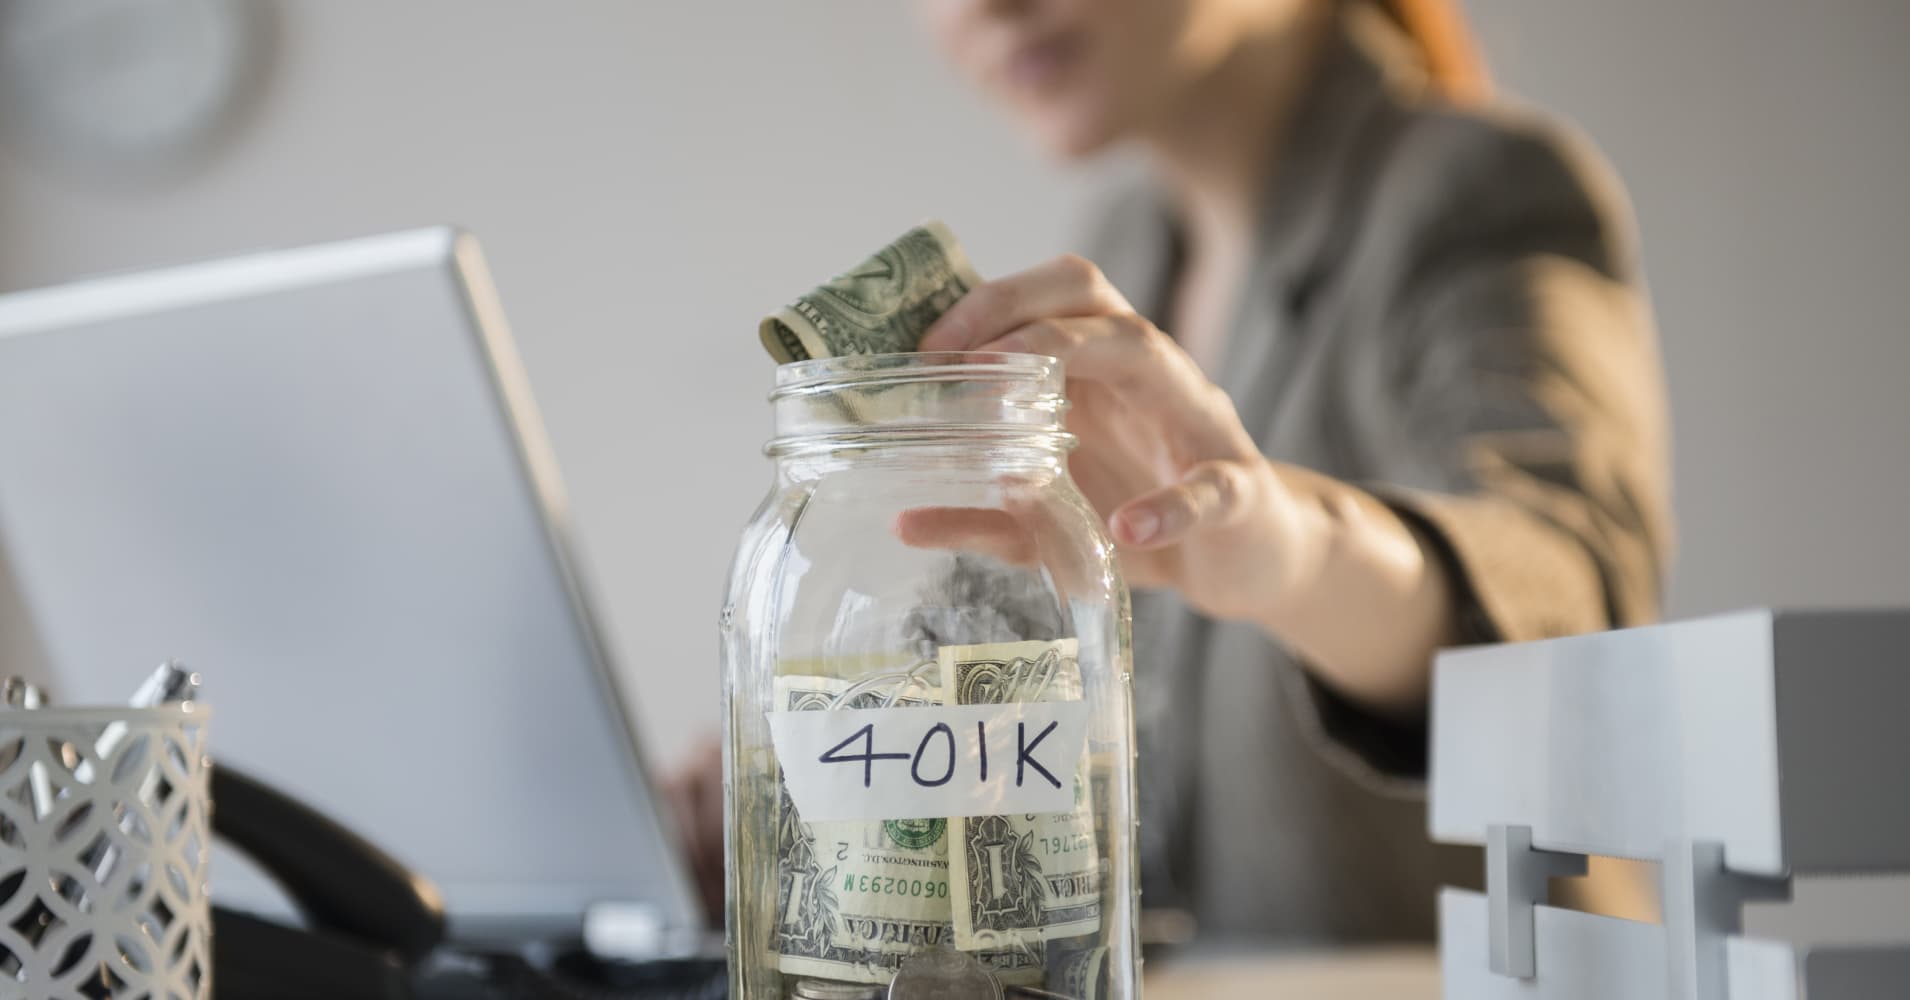 These 10 companies offer the best 401(k) plans